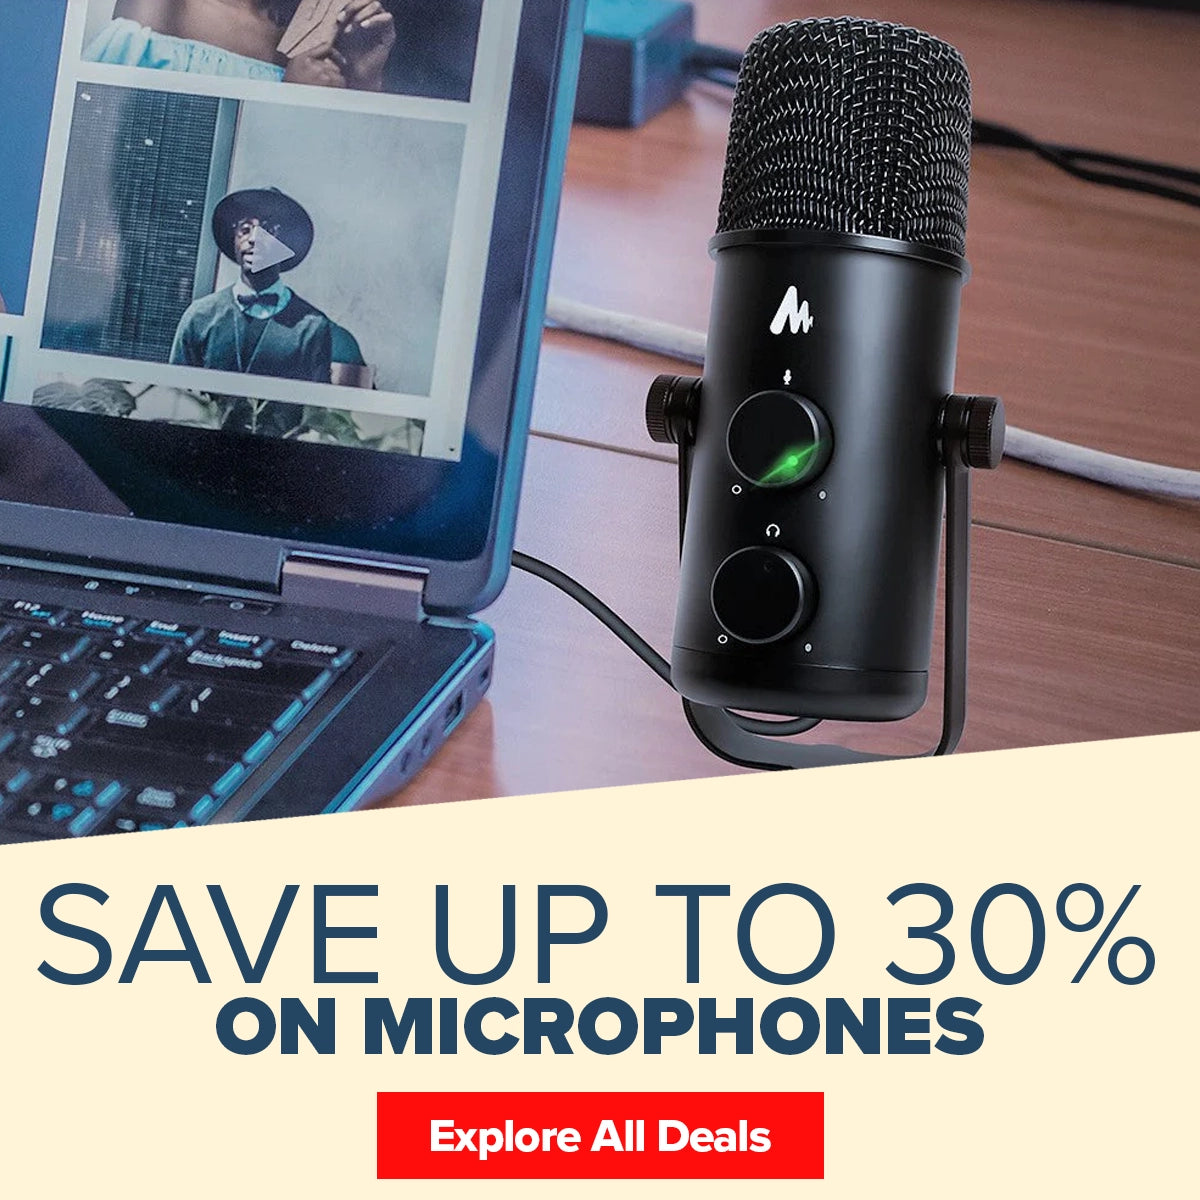 Save up to 30% on microphones